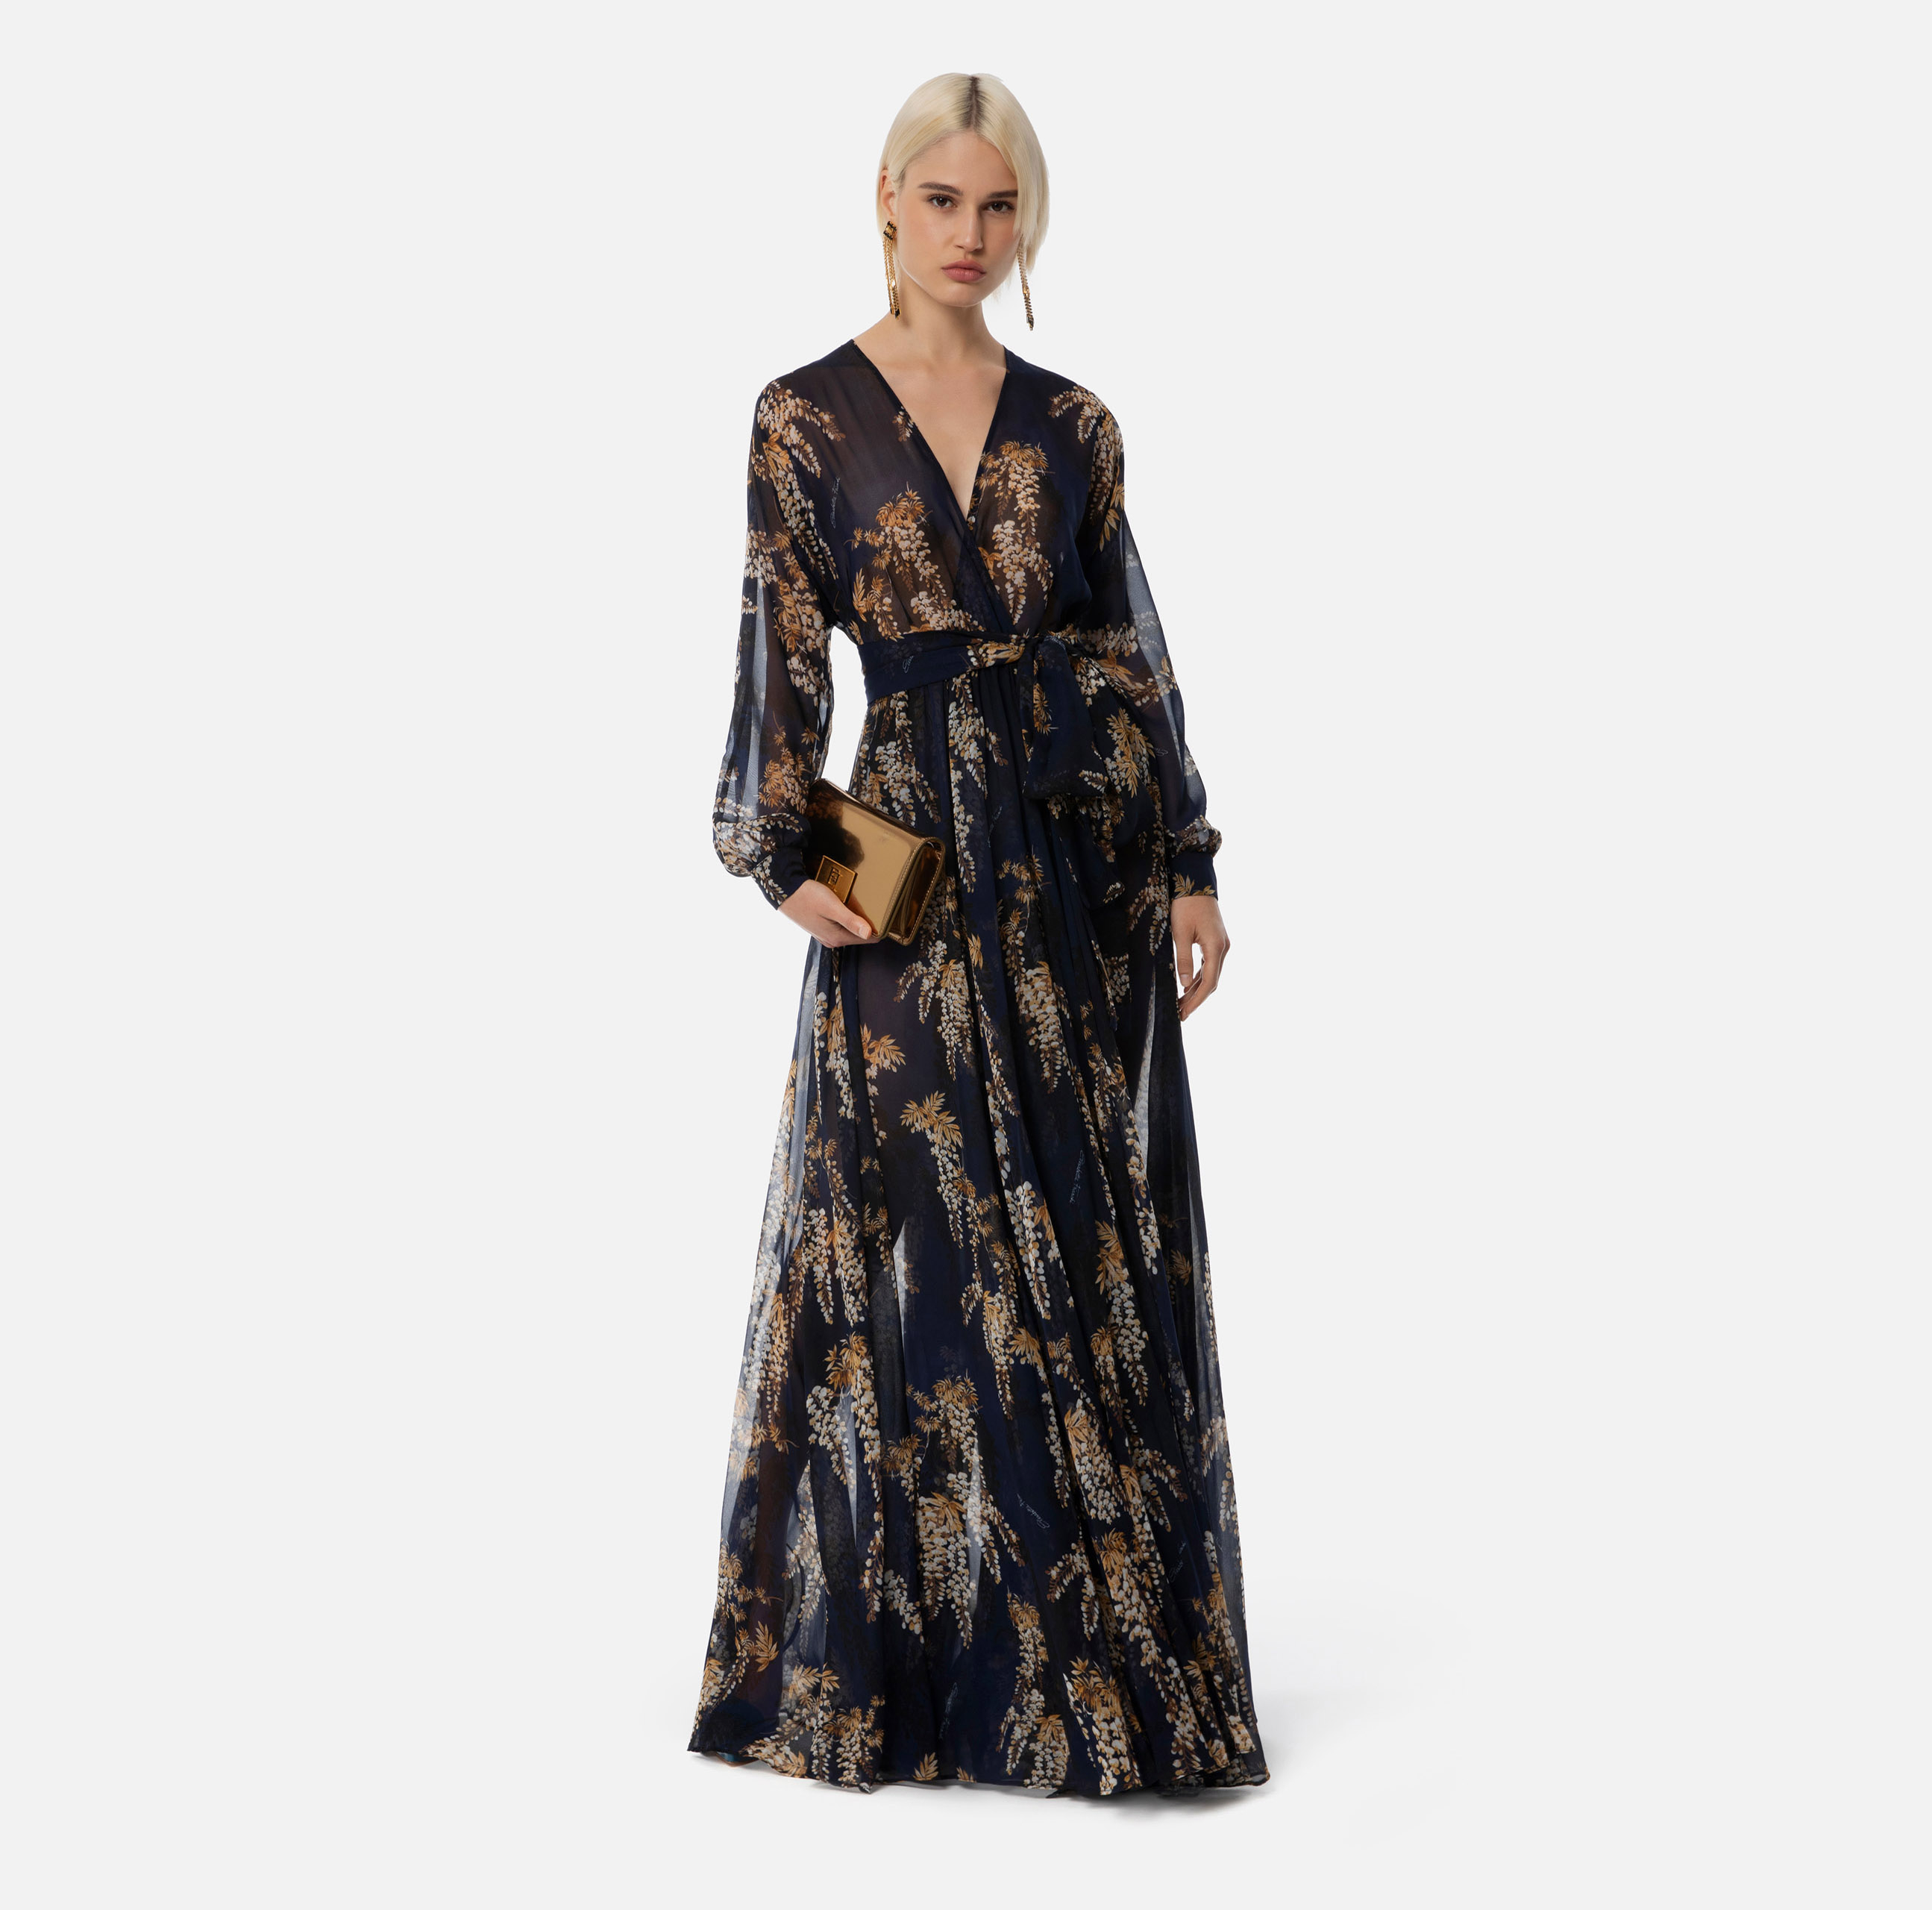 Red Carpet dress made of voile with floral print - Elisabetta Franchi